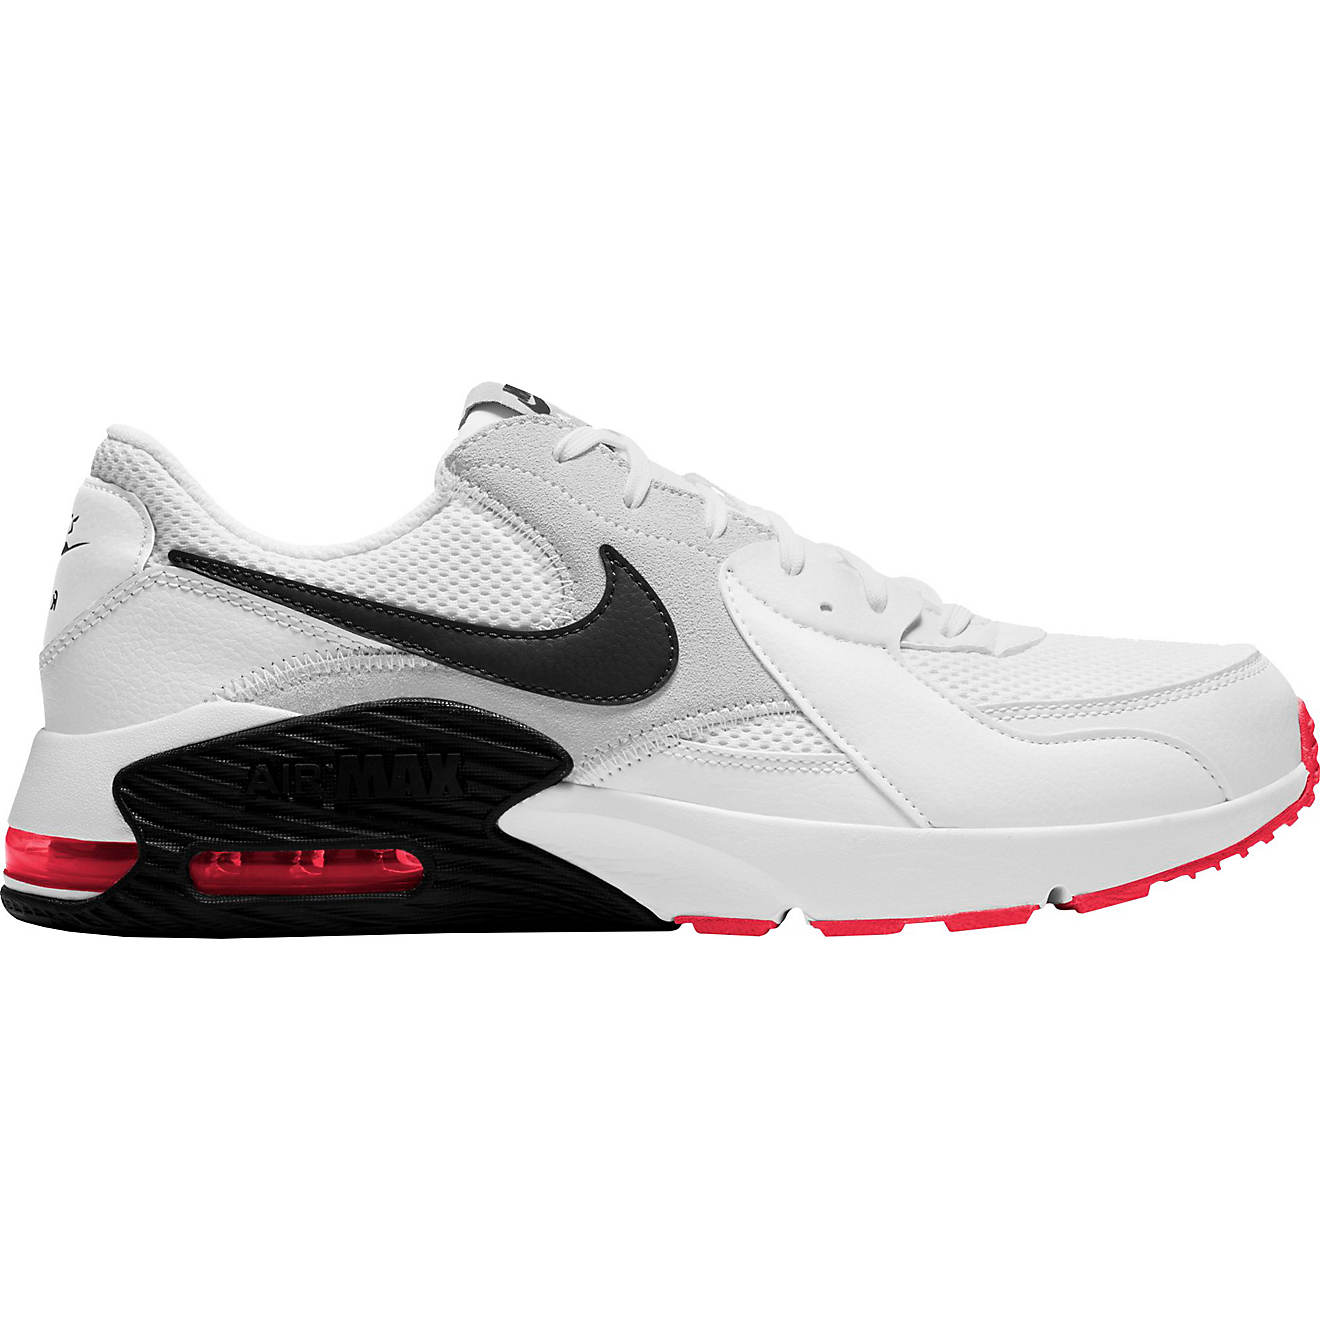 Nike Men's Air Max Excee Running Shoes on Sale At Academy Sports + Outdoors